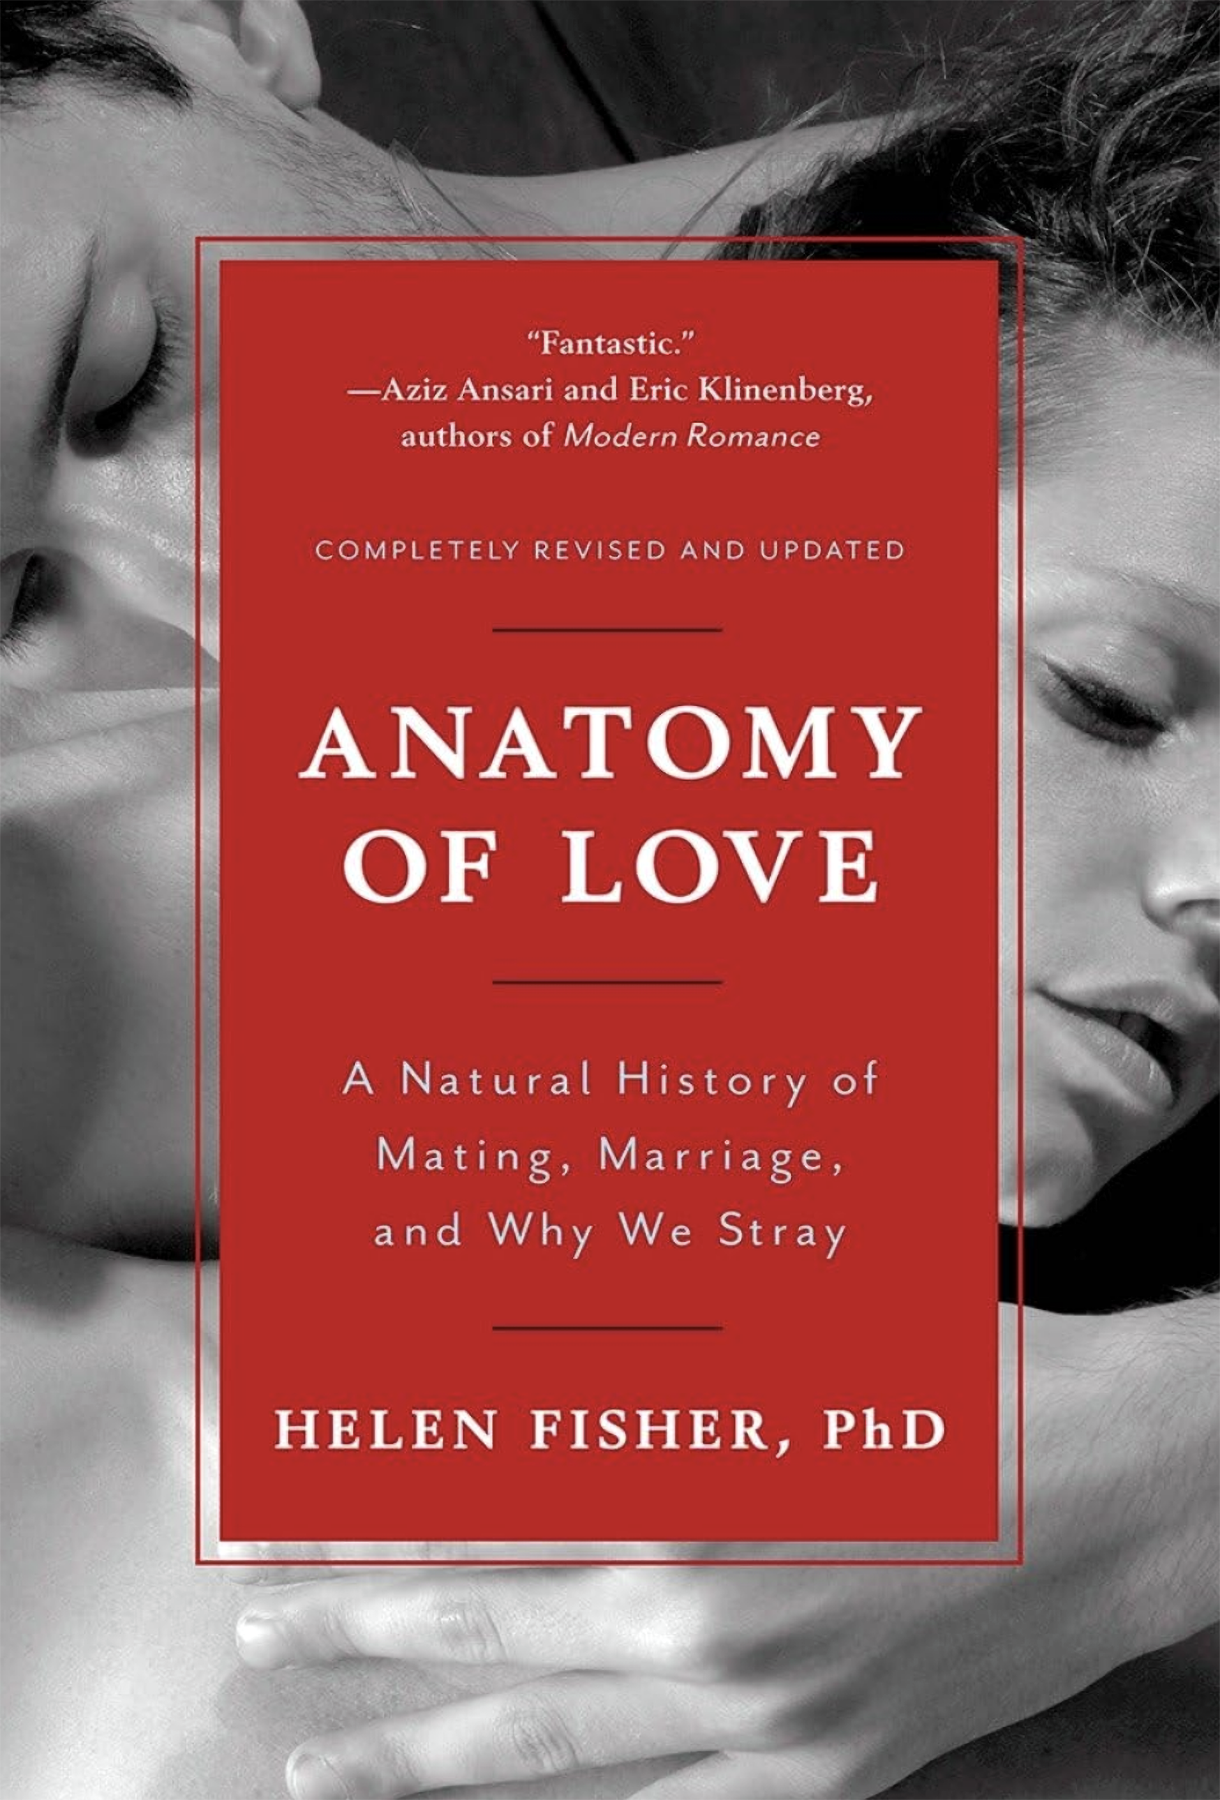 Book cover: "Anatomy of Love."